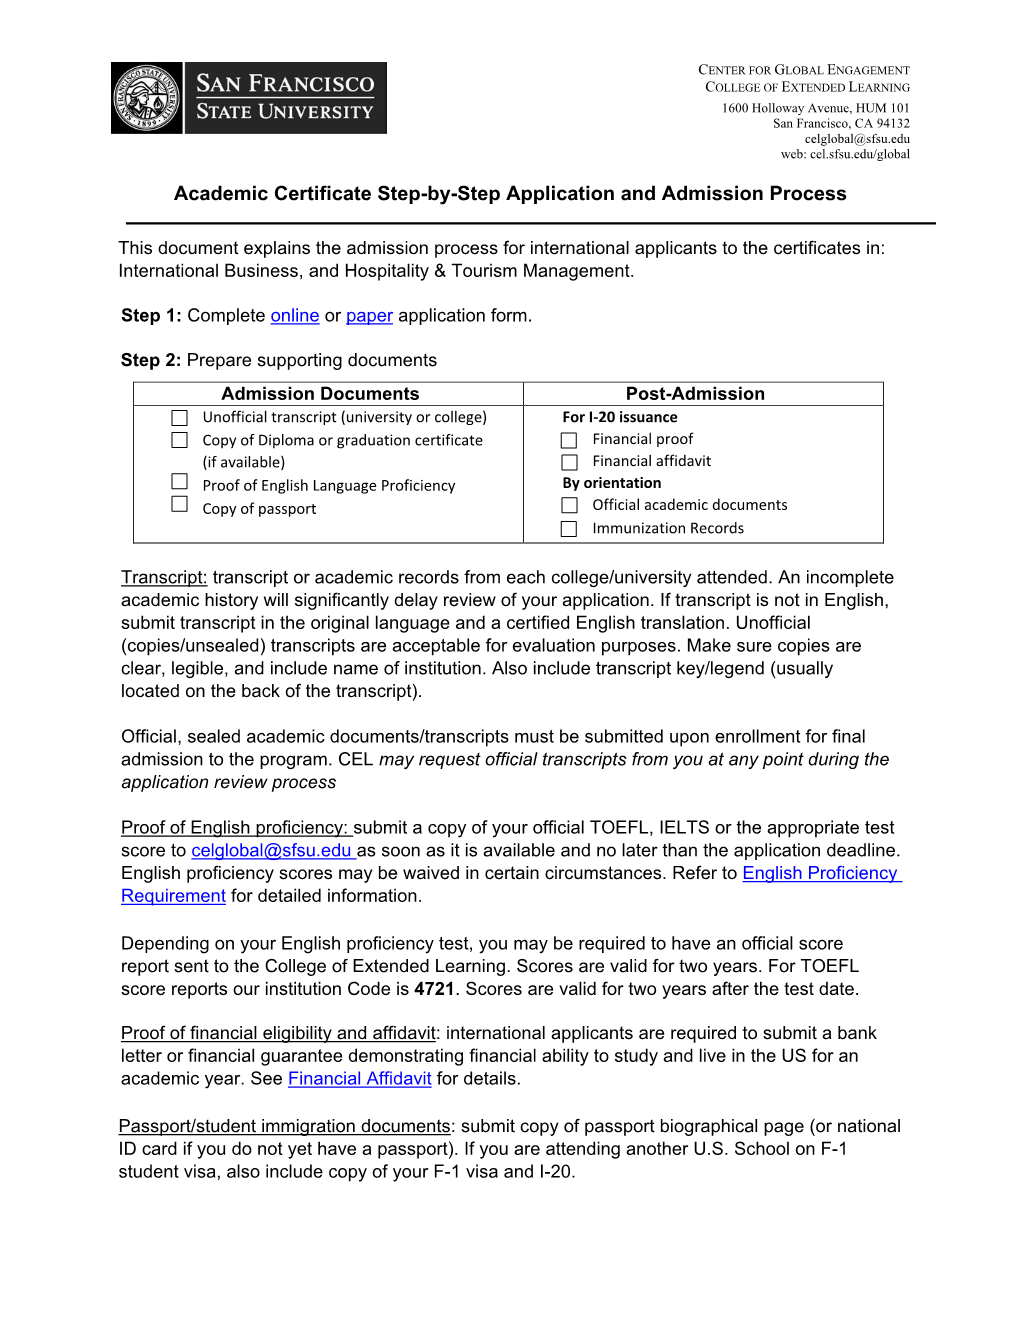 Academic Certificate Step-By-Step Application and Admission Process